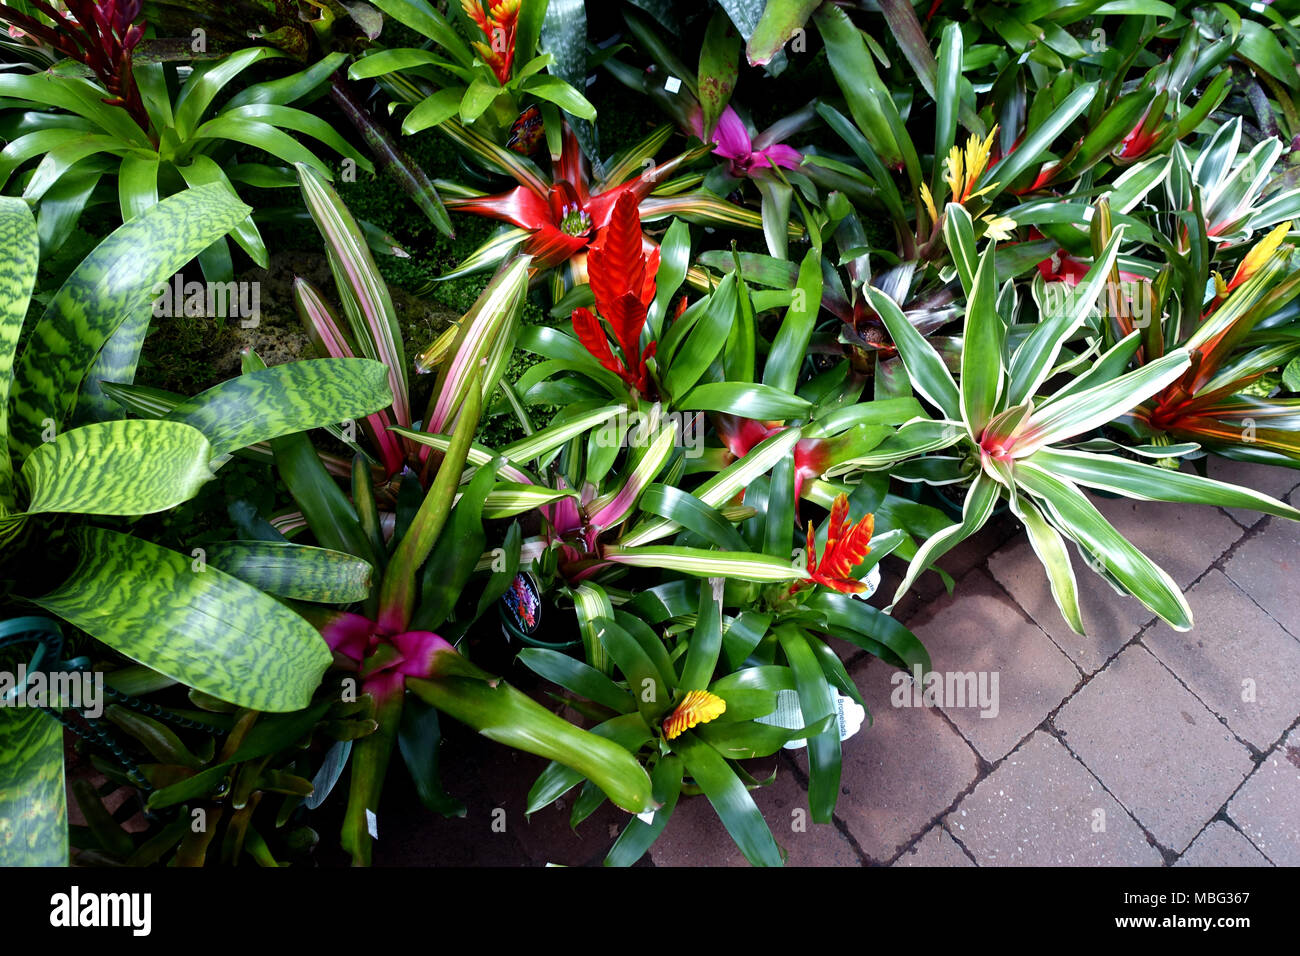 Mixed colours of Vriesea plants or known as Vriesia draco Bromeliad Stock Photo